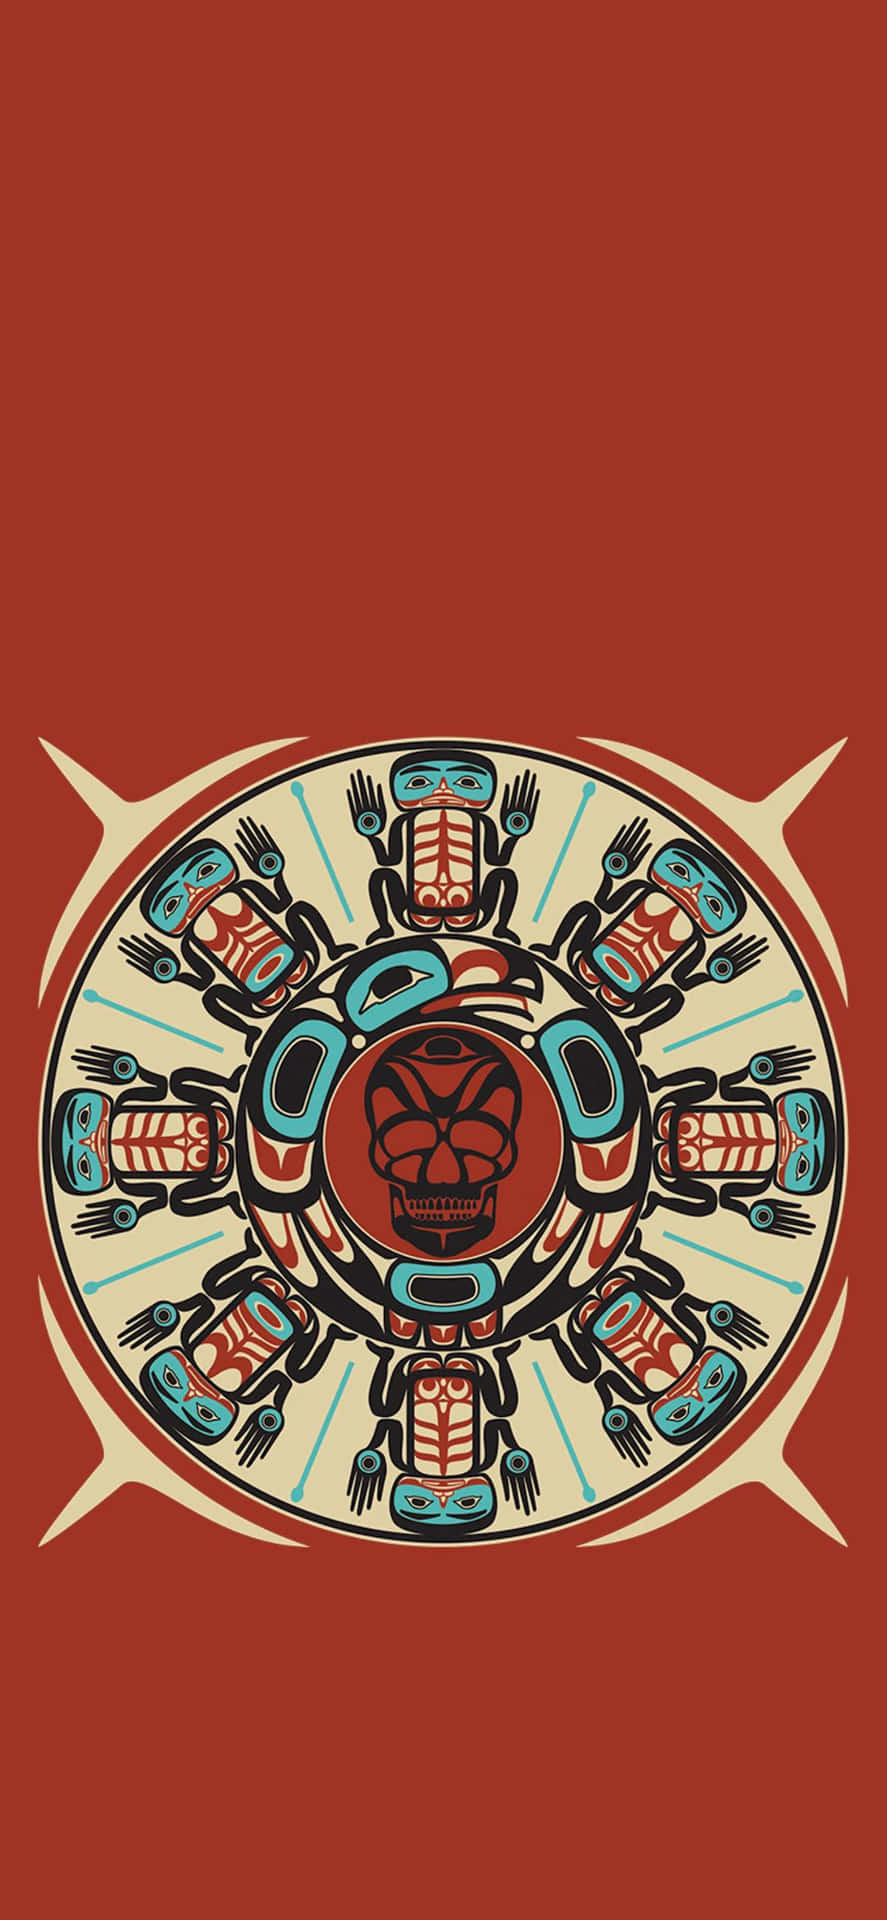 “Join the tribe! Download the Grateful Dead iPhone app today!” Wallpaper